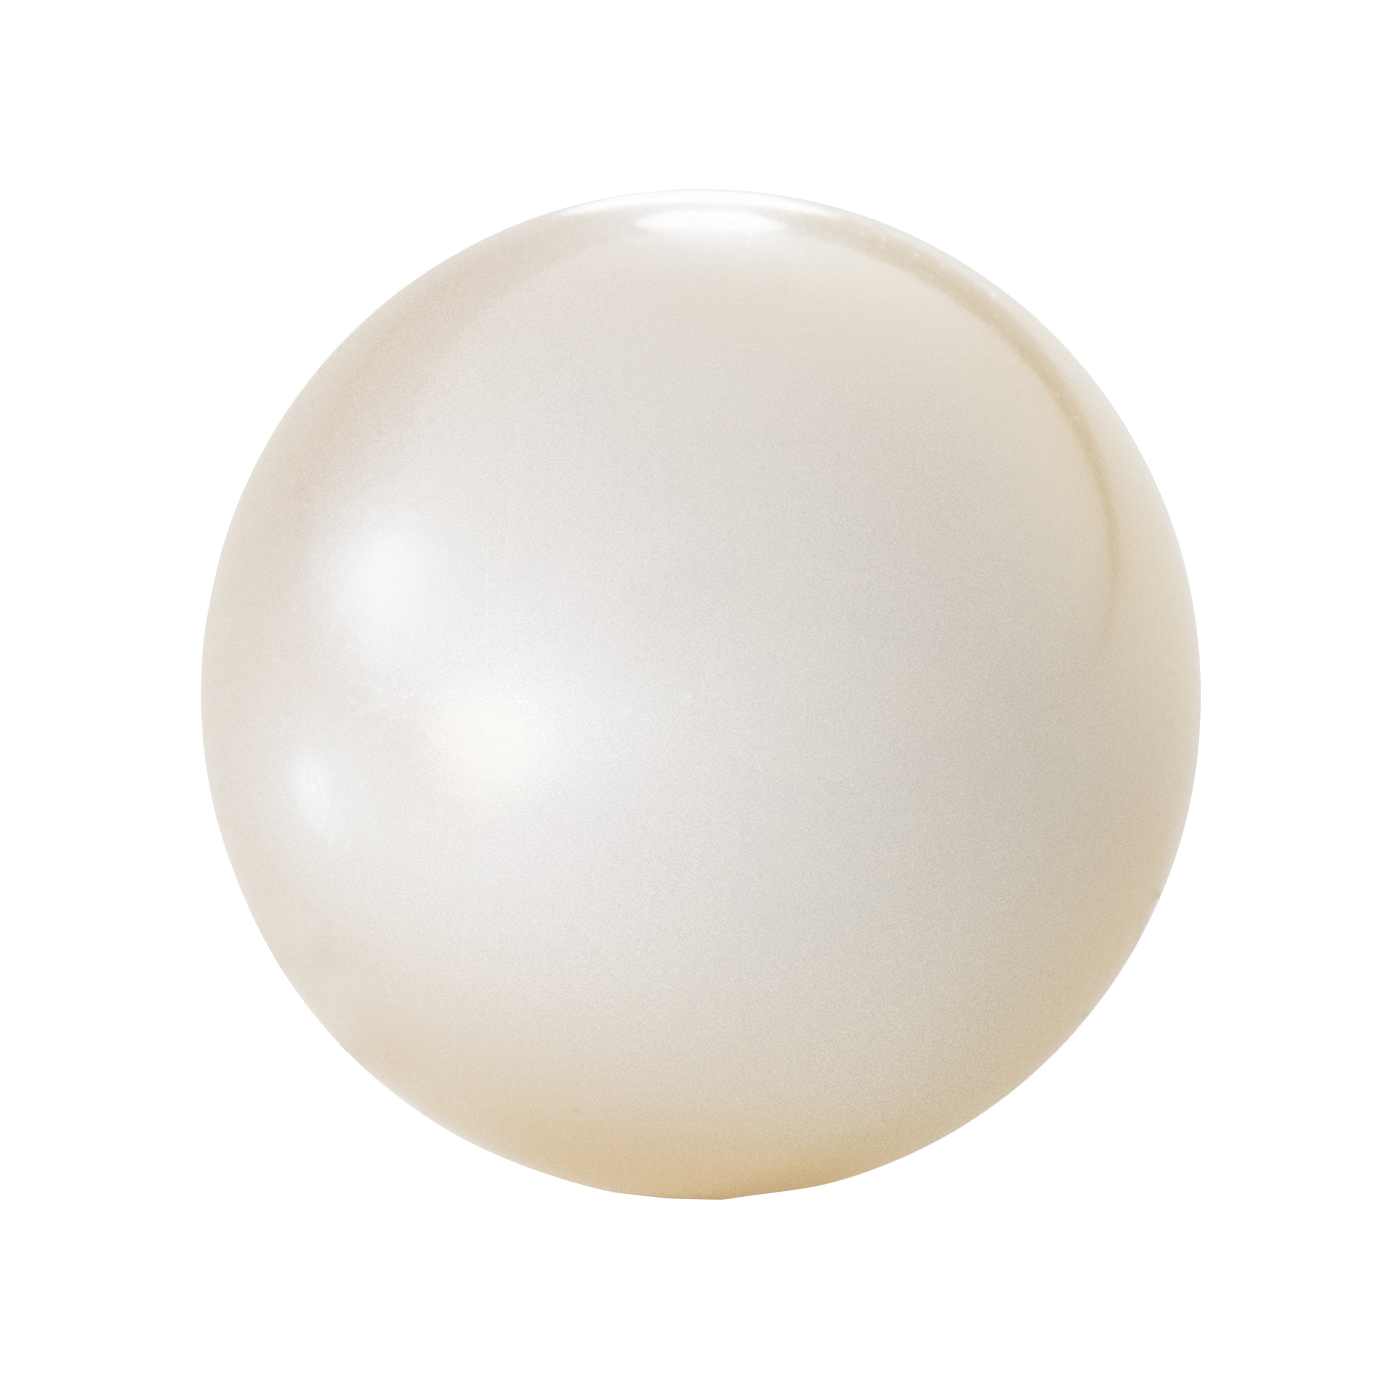 Cultured Pearl, Freshwater, 4/4, ø 7.0-7.5 mm, White - 1 piece